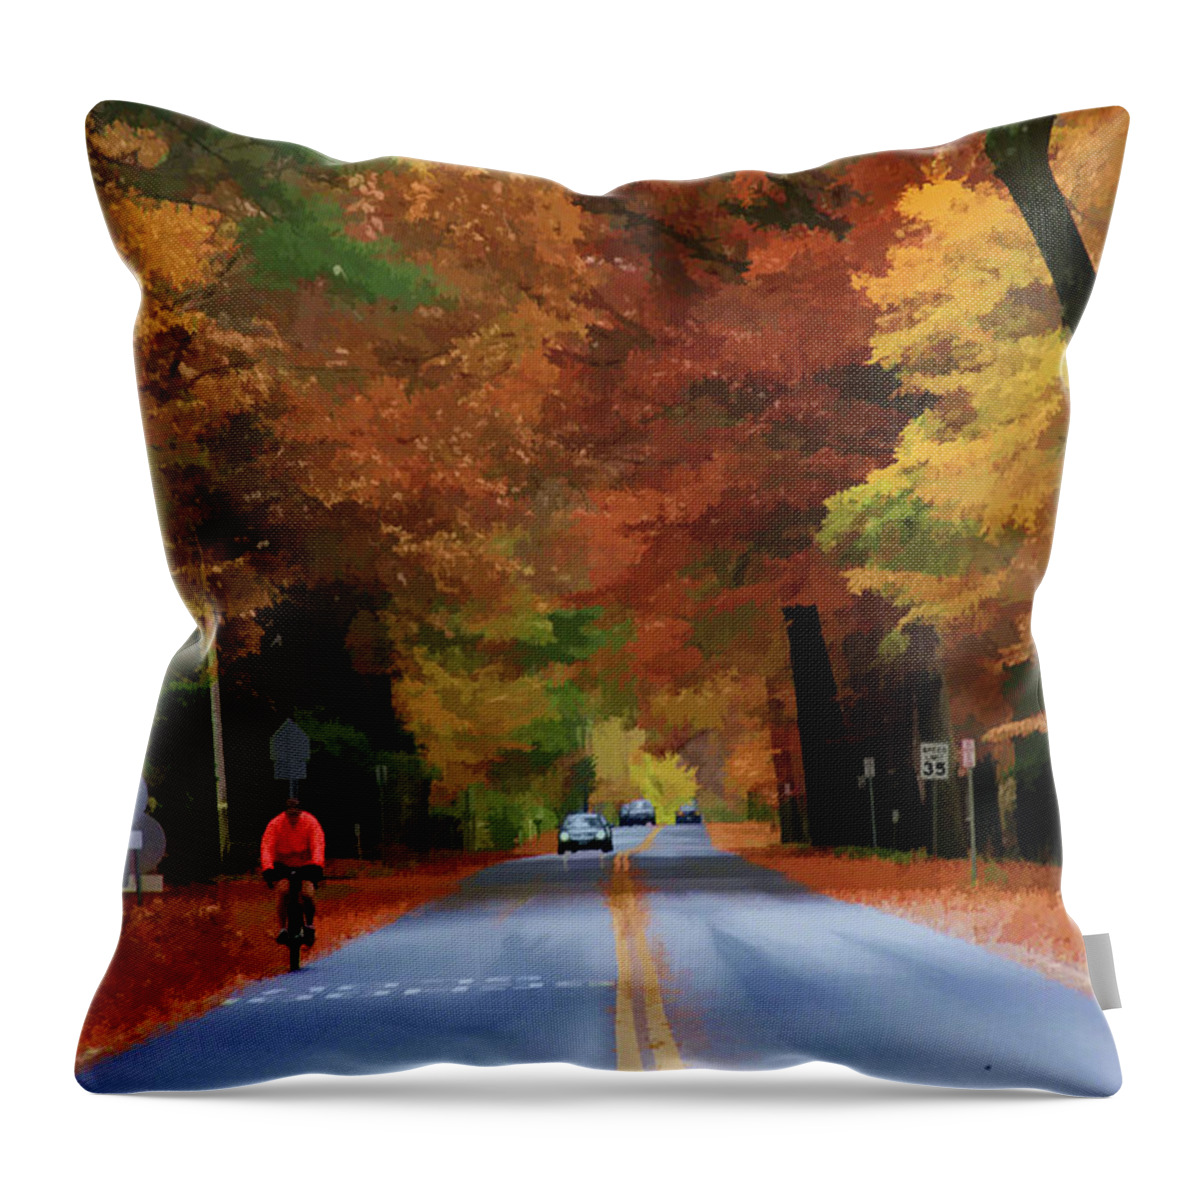 Bicycle Throw Pillow featuring the digital art Enjoying The Ride by Xine Segalas